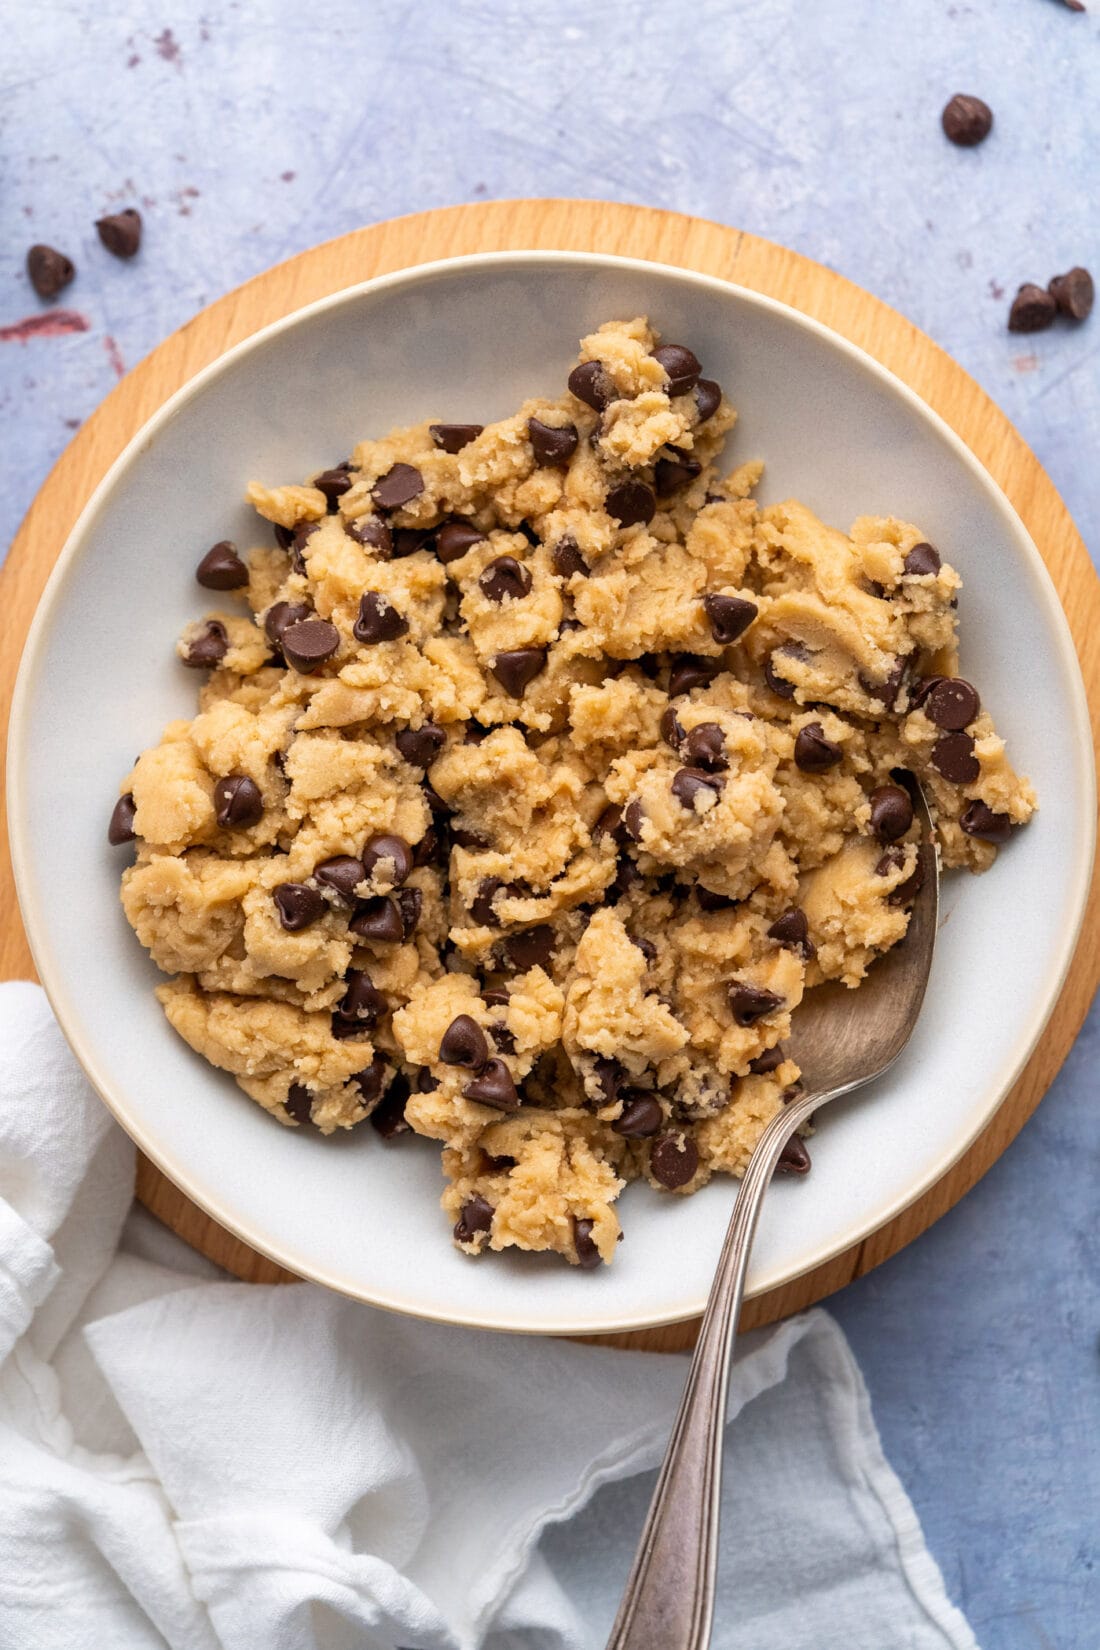 Plate of Edible Cookie Dough